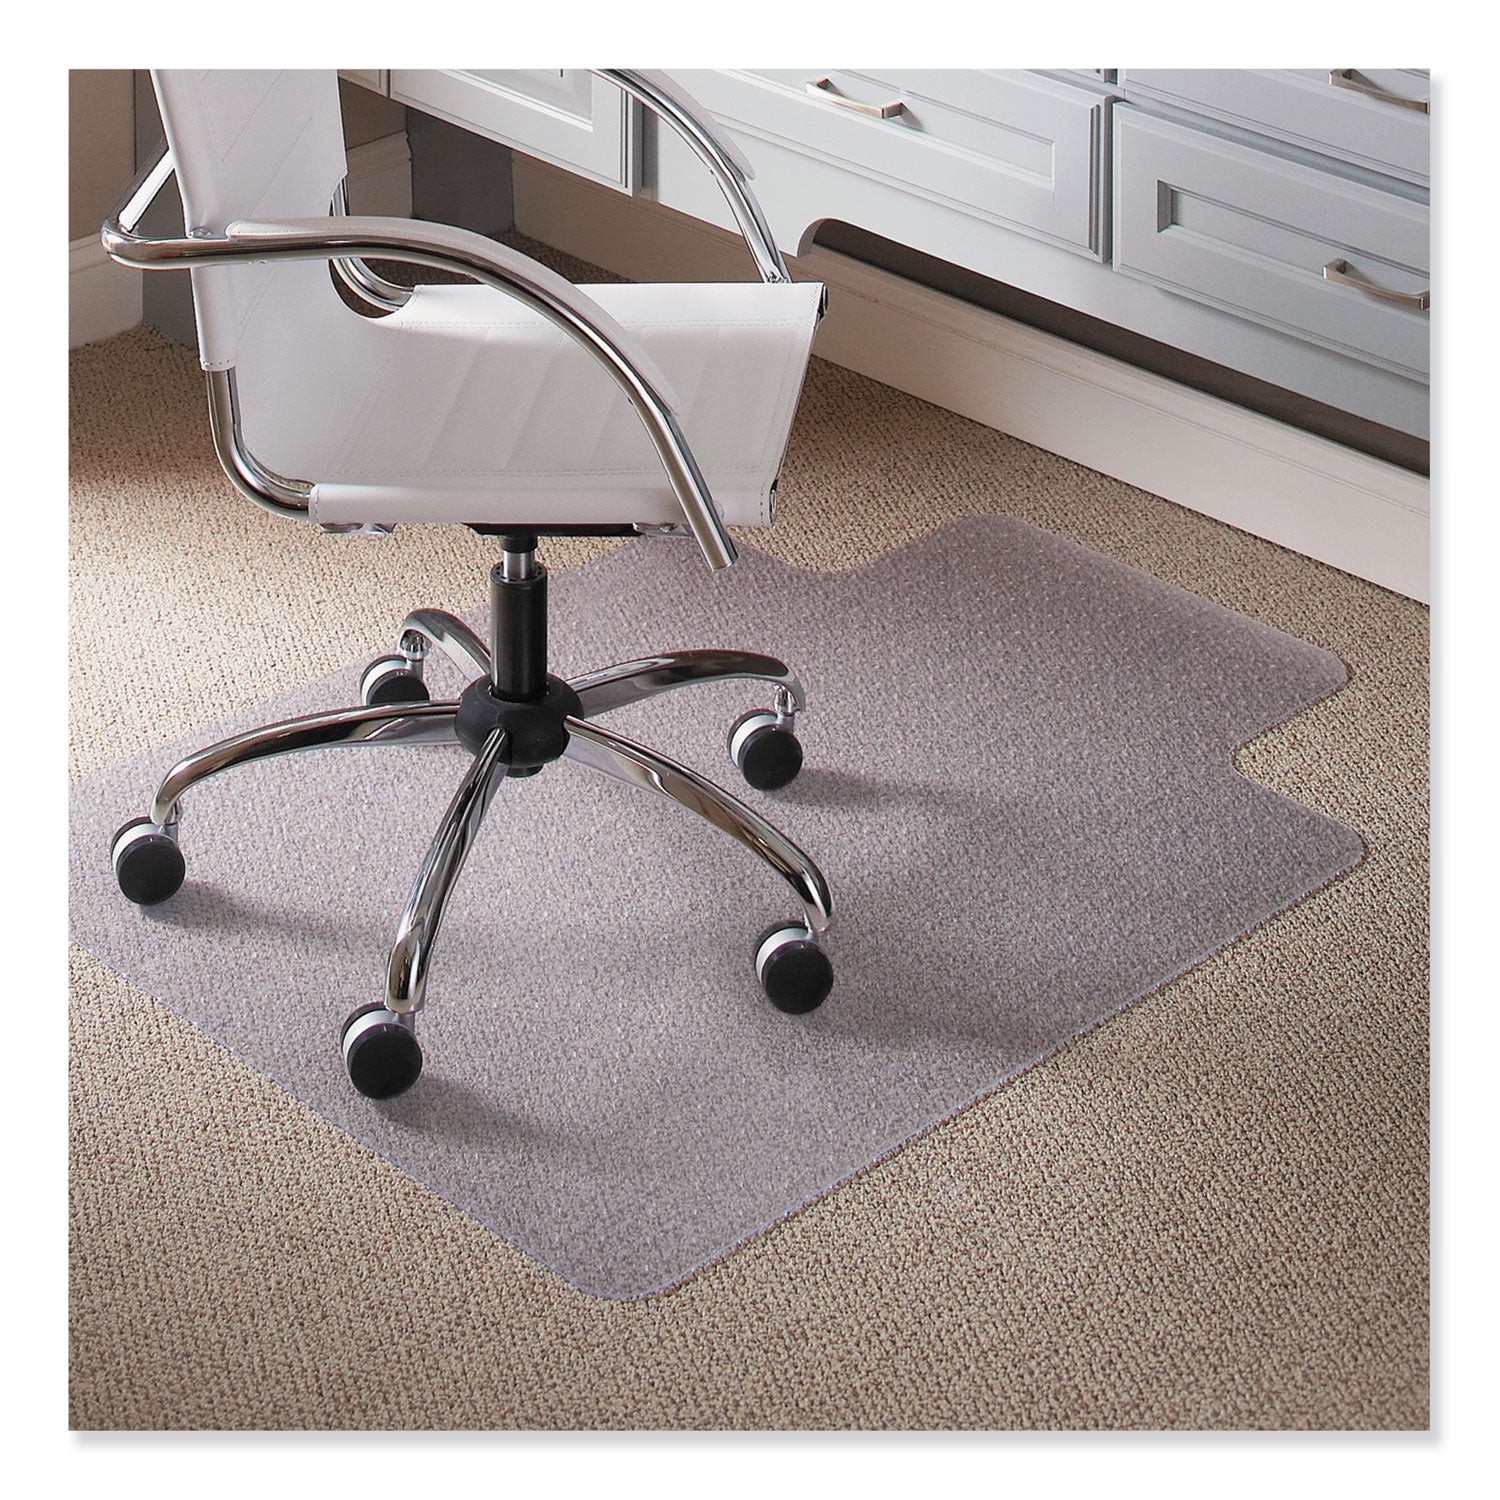 EverLife Light Use Chair Mat for Flat to Low Pile Carpet, Rectangular with Lip, 45 x 53, Clear - 